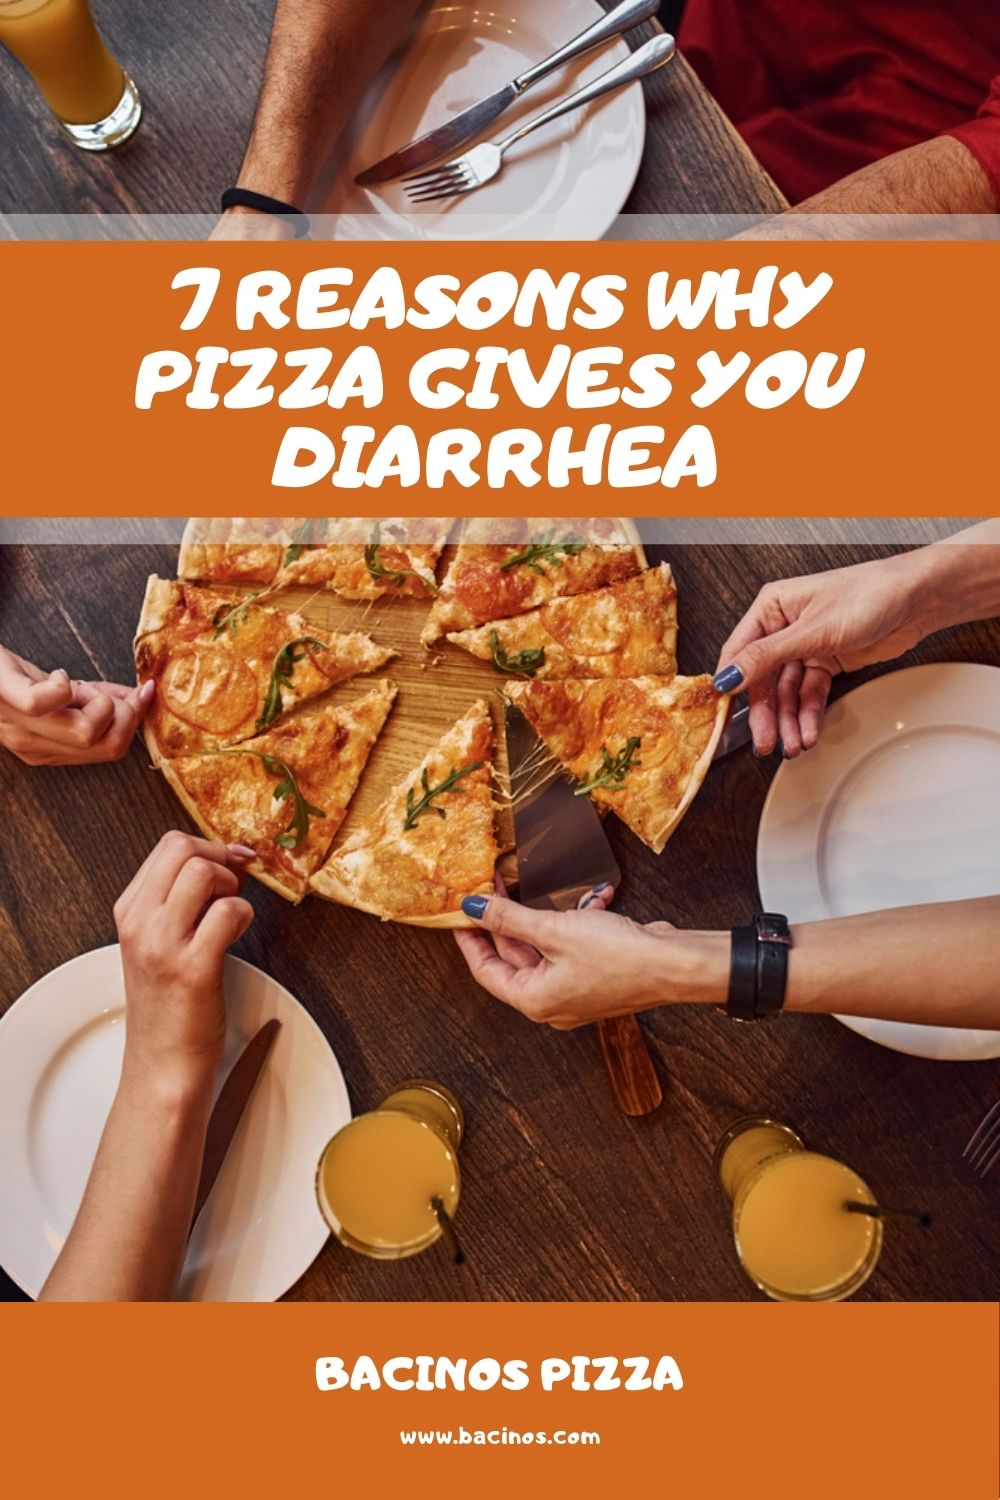 7 Reasons Why Pizza Gives You Diarrhea 4